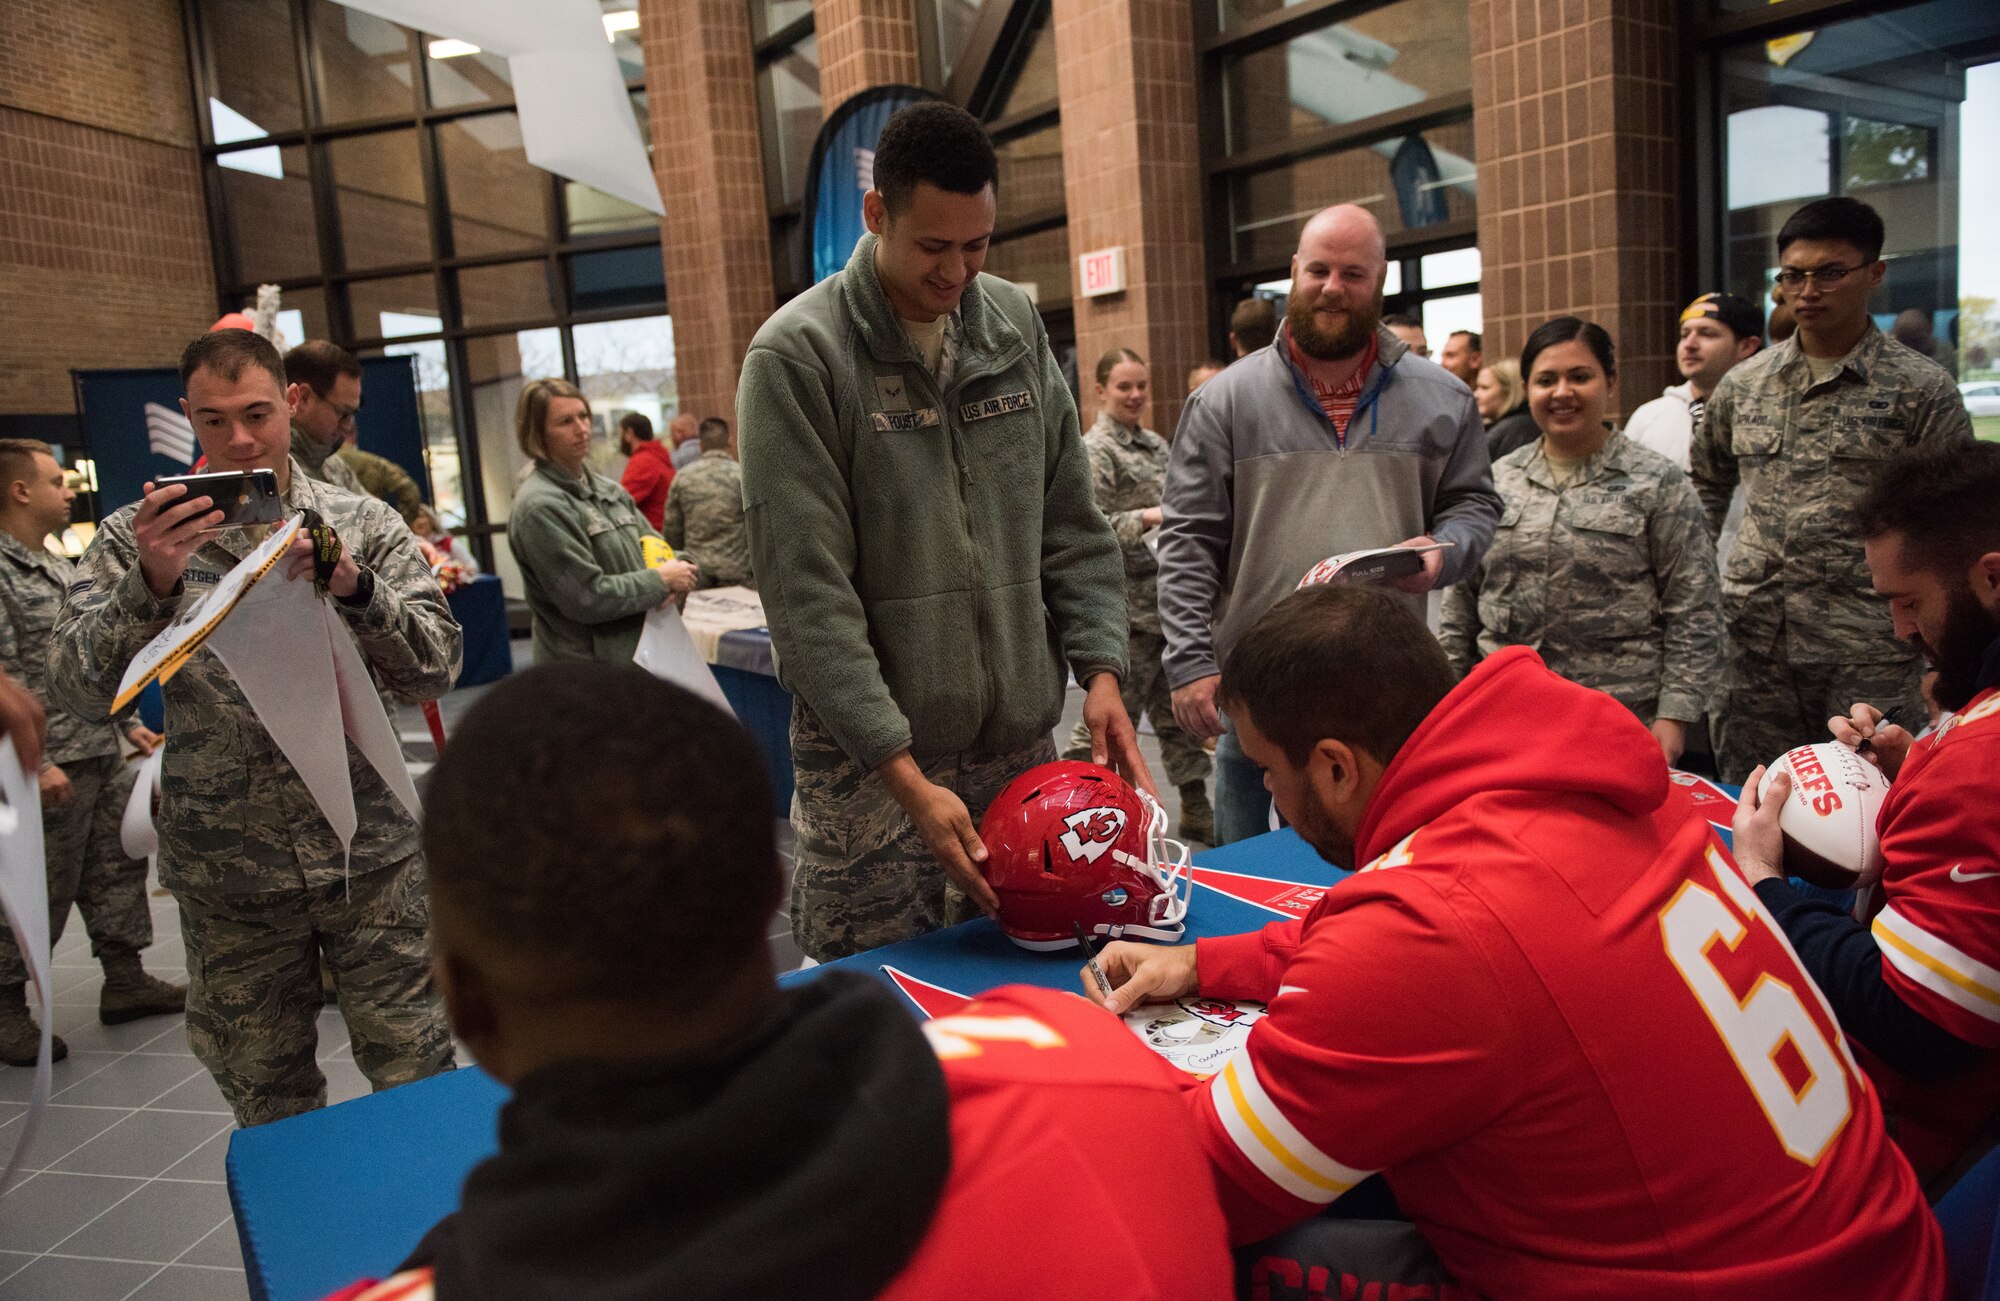 National Football League’s Kansas City Chiefs offensive linemen meet with fans and sign autographs during a visit at Whiteman Air Force Base, Missouri, Oct. 29, 2019.